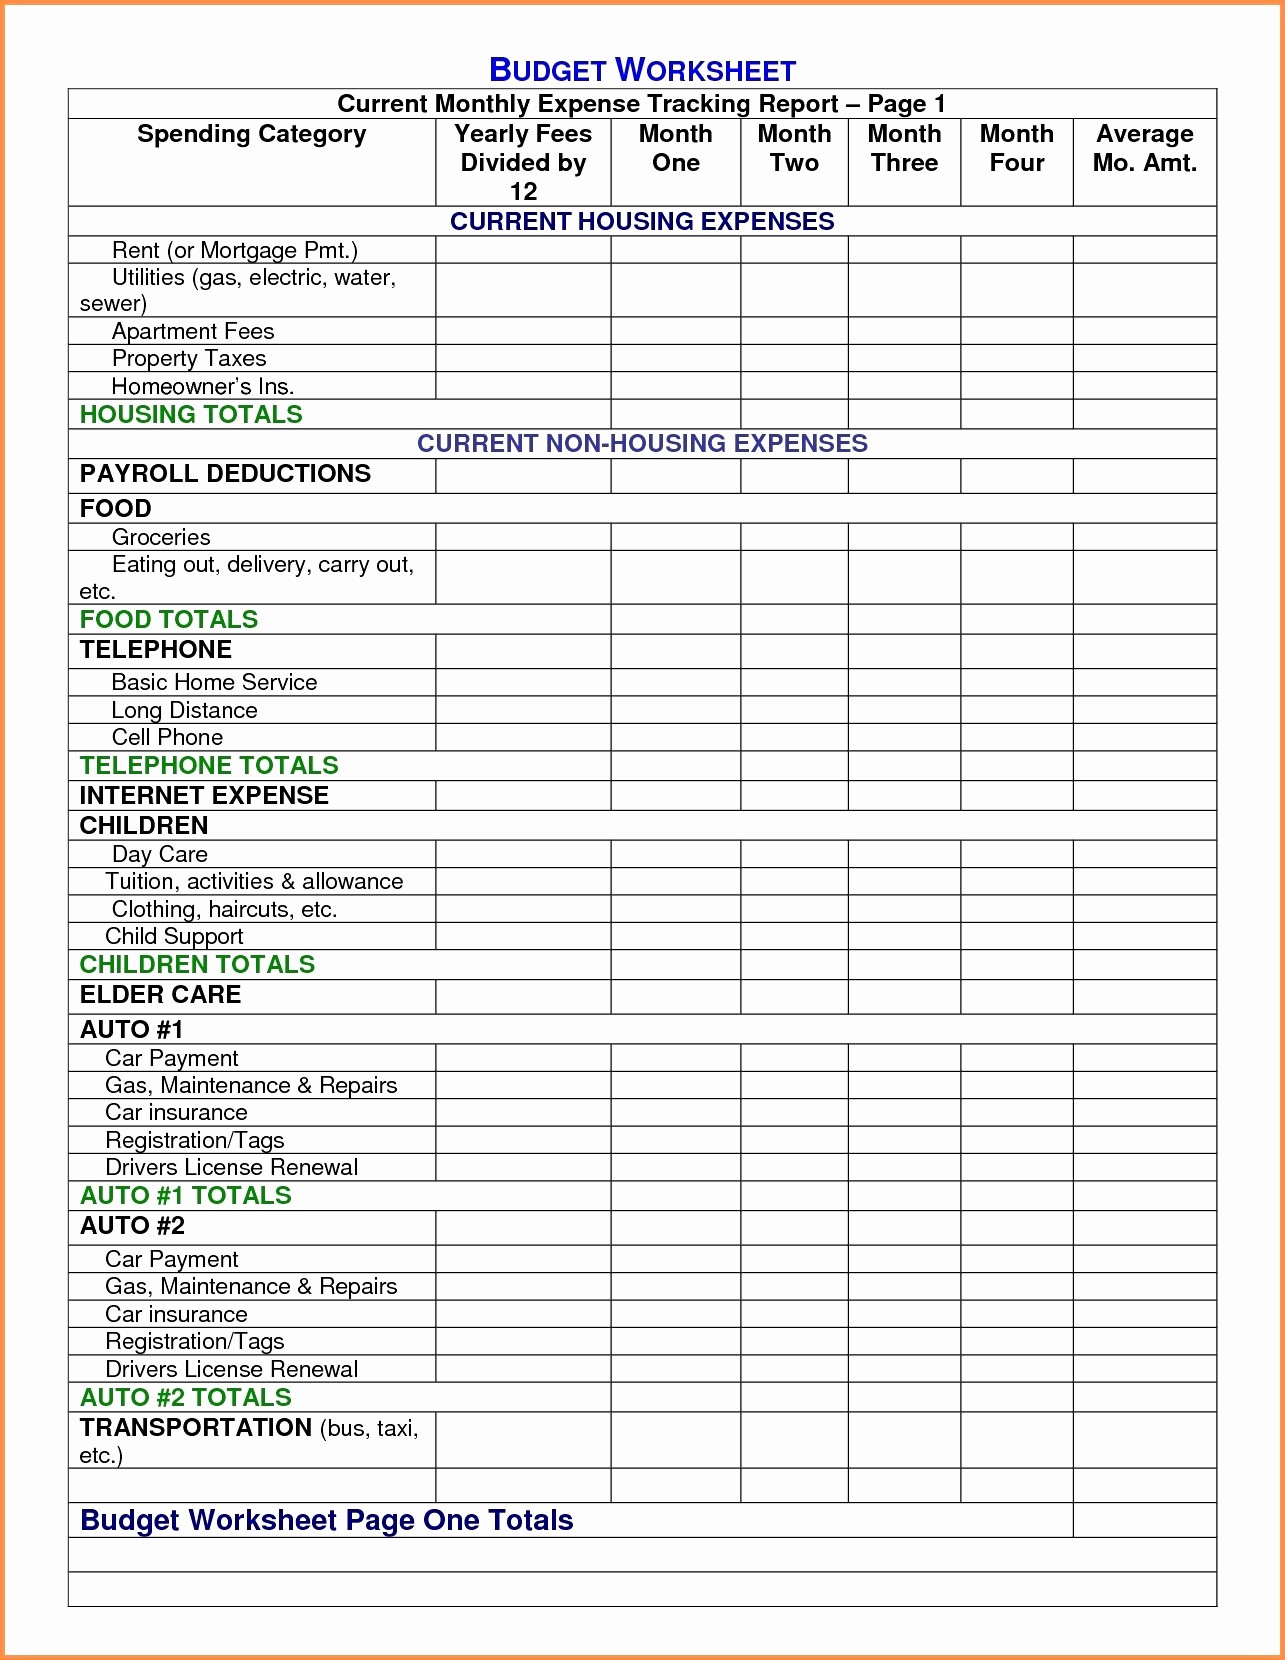 50 New Real Estate Client Tracking Spreadsheet DOCUMENT IDEAS